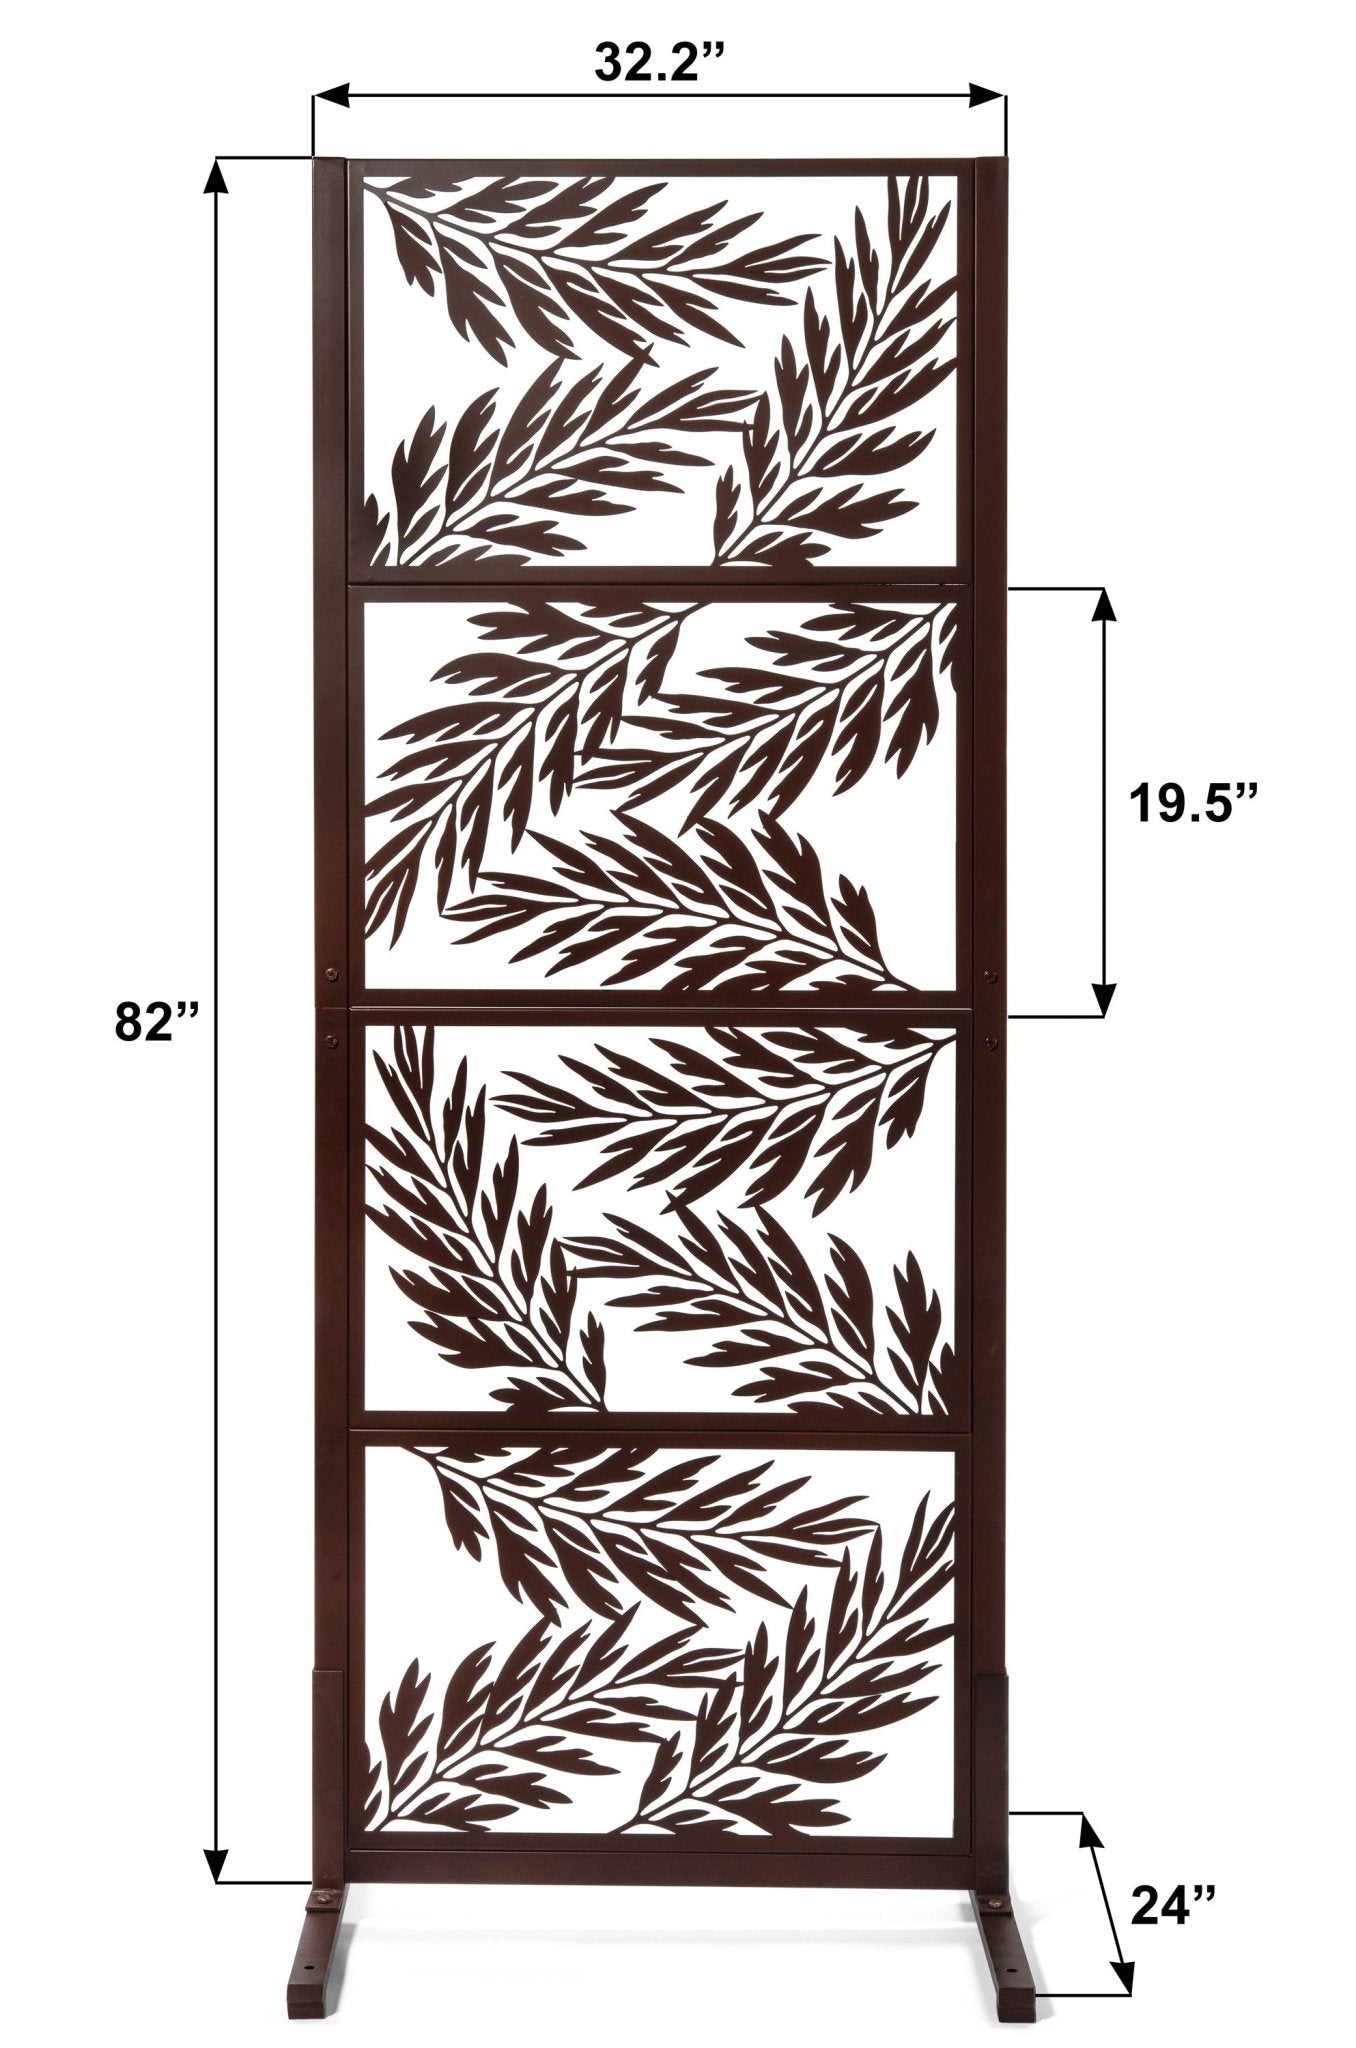 H Potter Trellis Screen Privacy for Patio Deck Balcony Freestanding